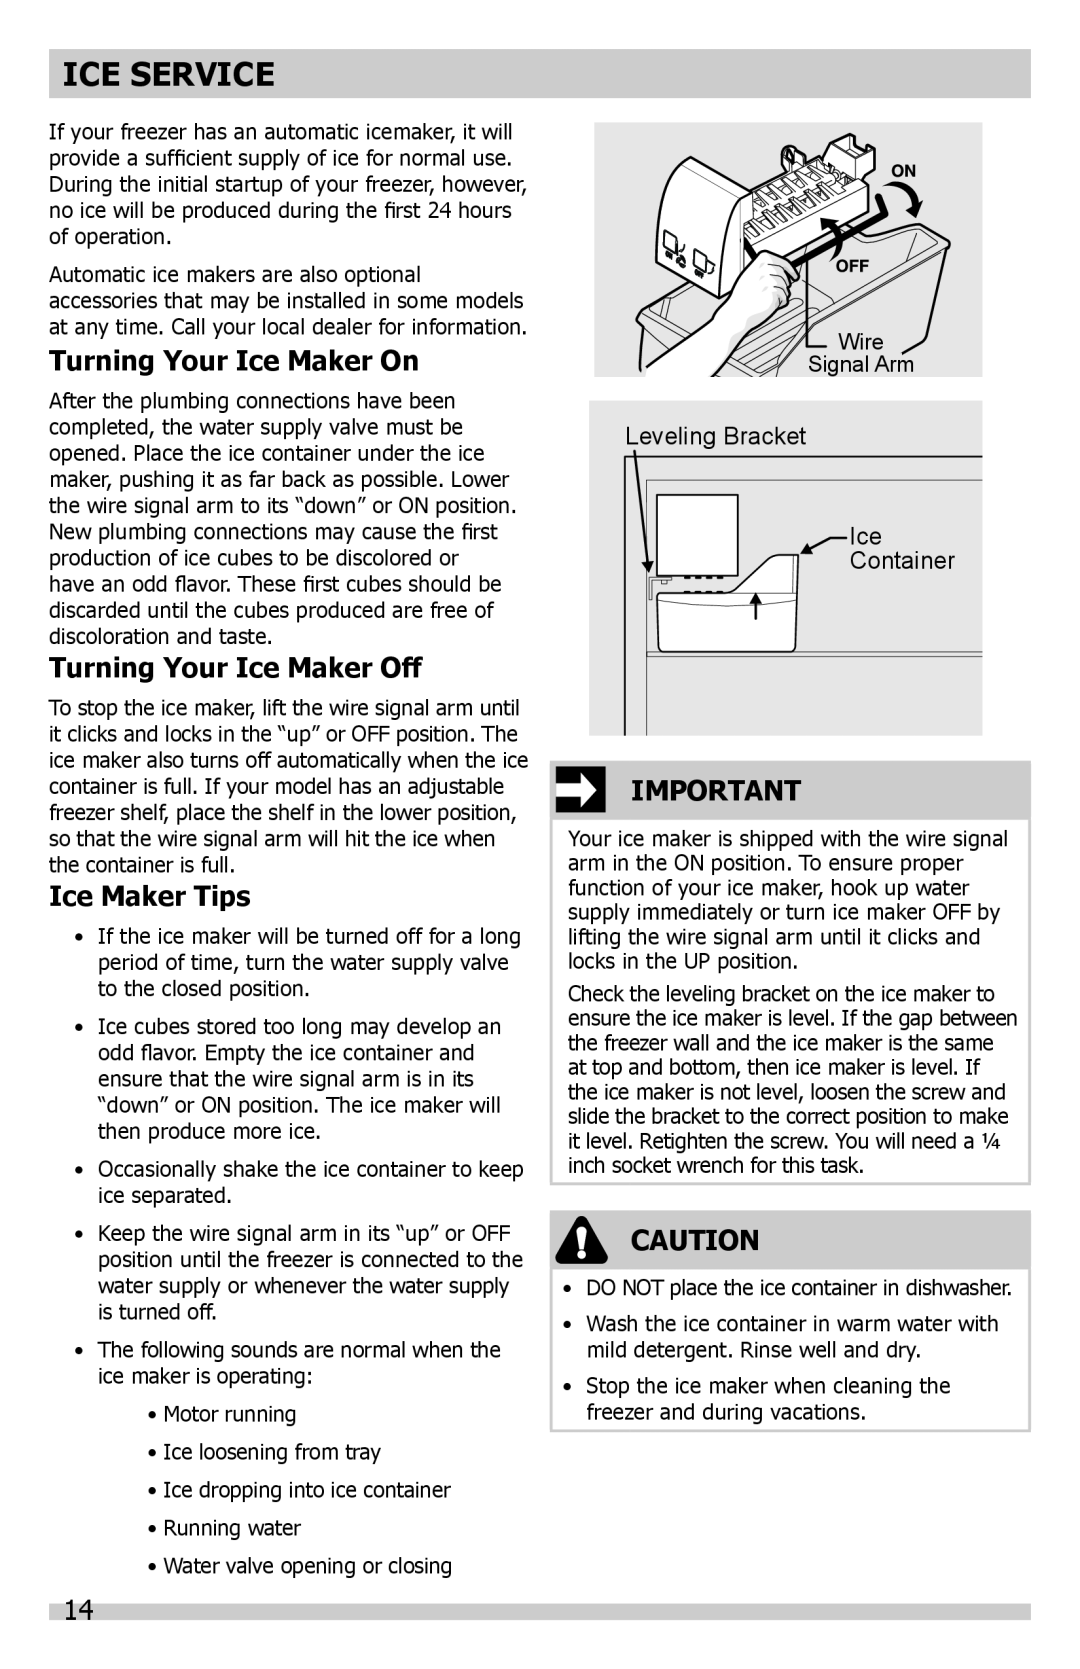 Frigidaire A01060901 manual Ice Service, Turning Your Ice Maker On, Turning Your Ice Maker Off, Ice Maker Tips 